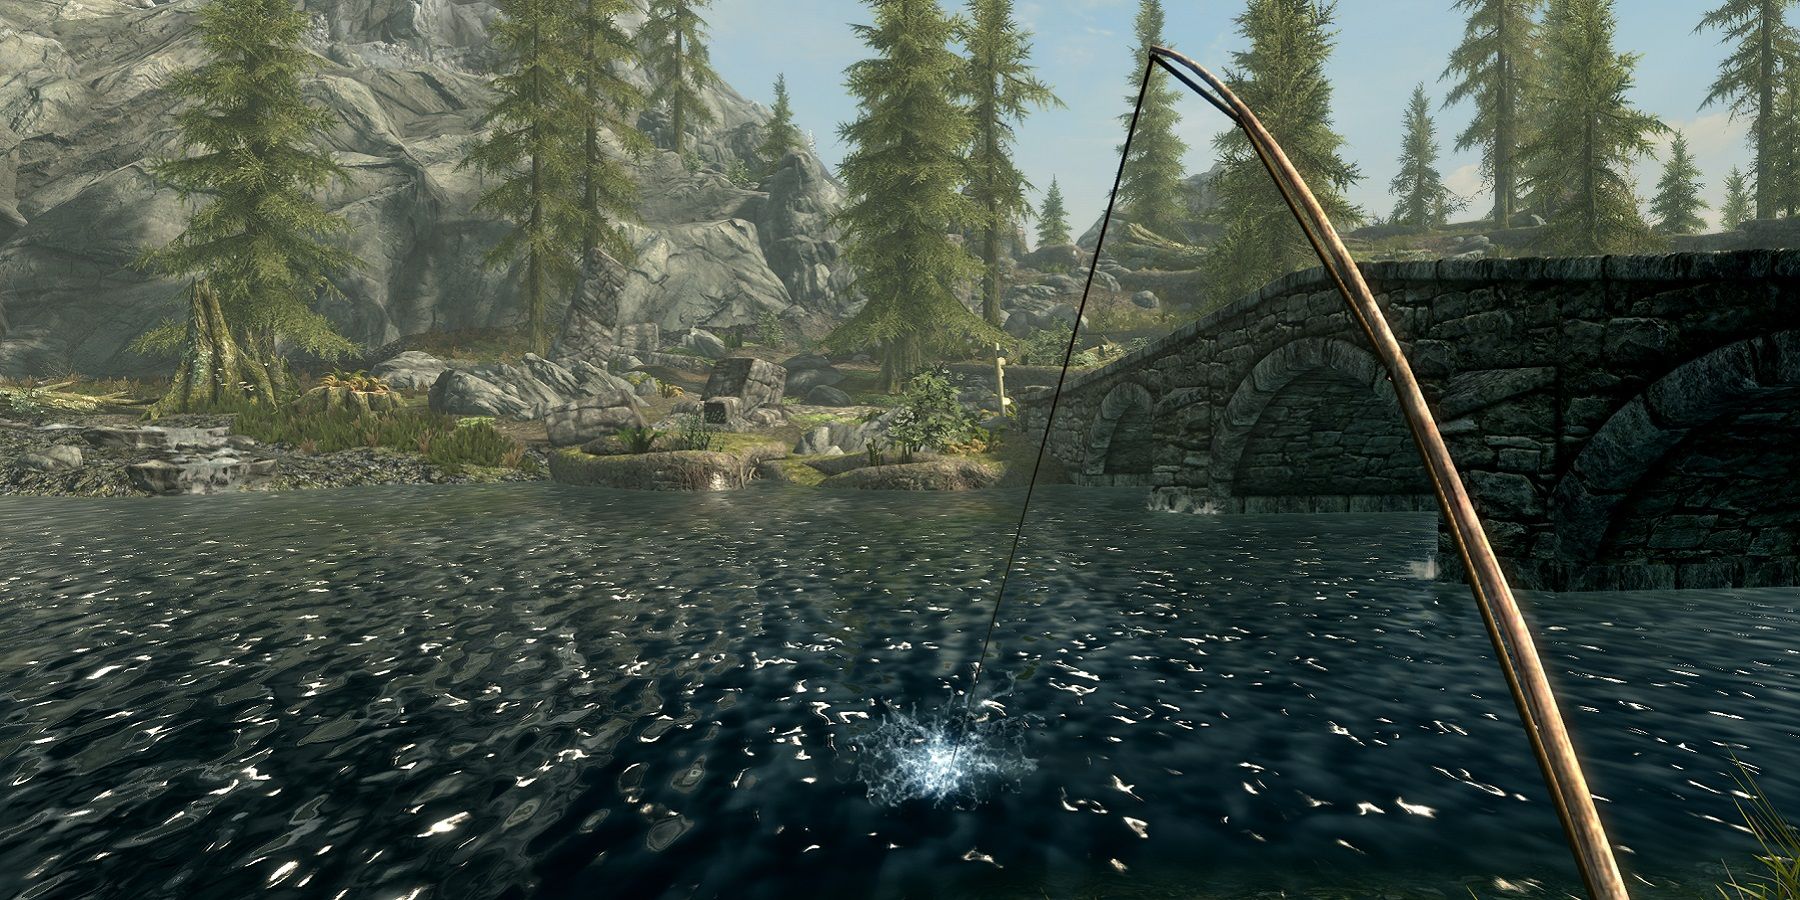 Image from Skyrim showing the player doing a spot of fishing in a river.